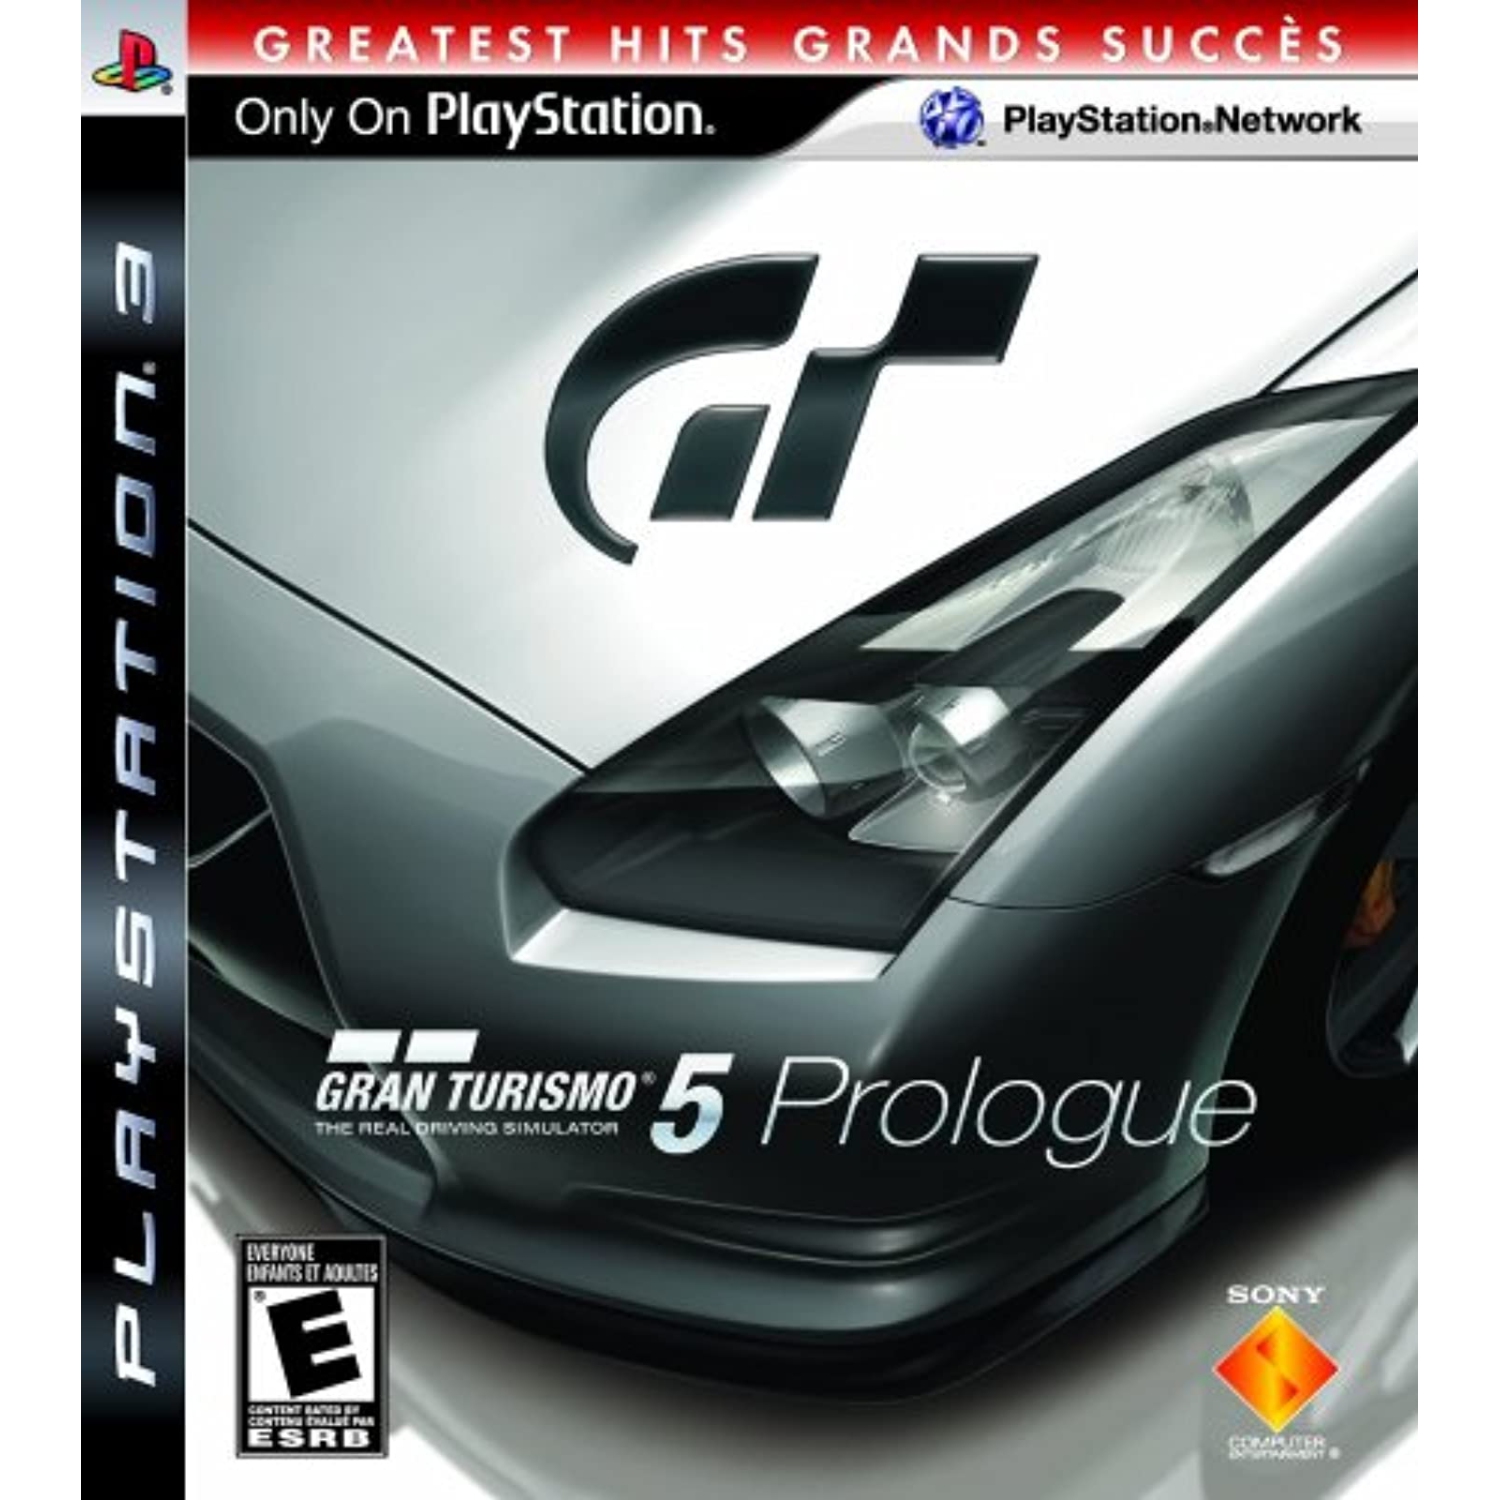 Previously Played - Gran Turismo 5 Prologue For PlayStation 3 PS3 Racing